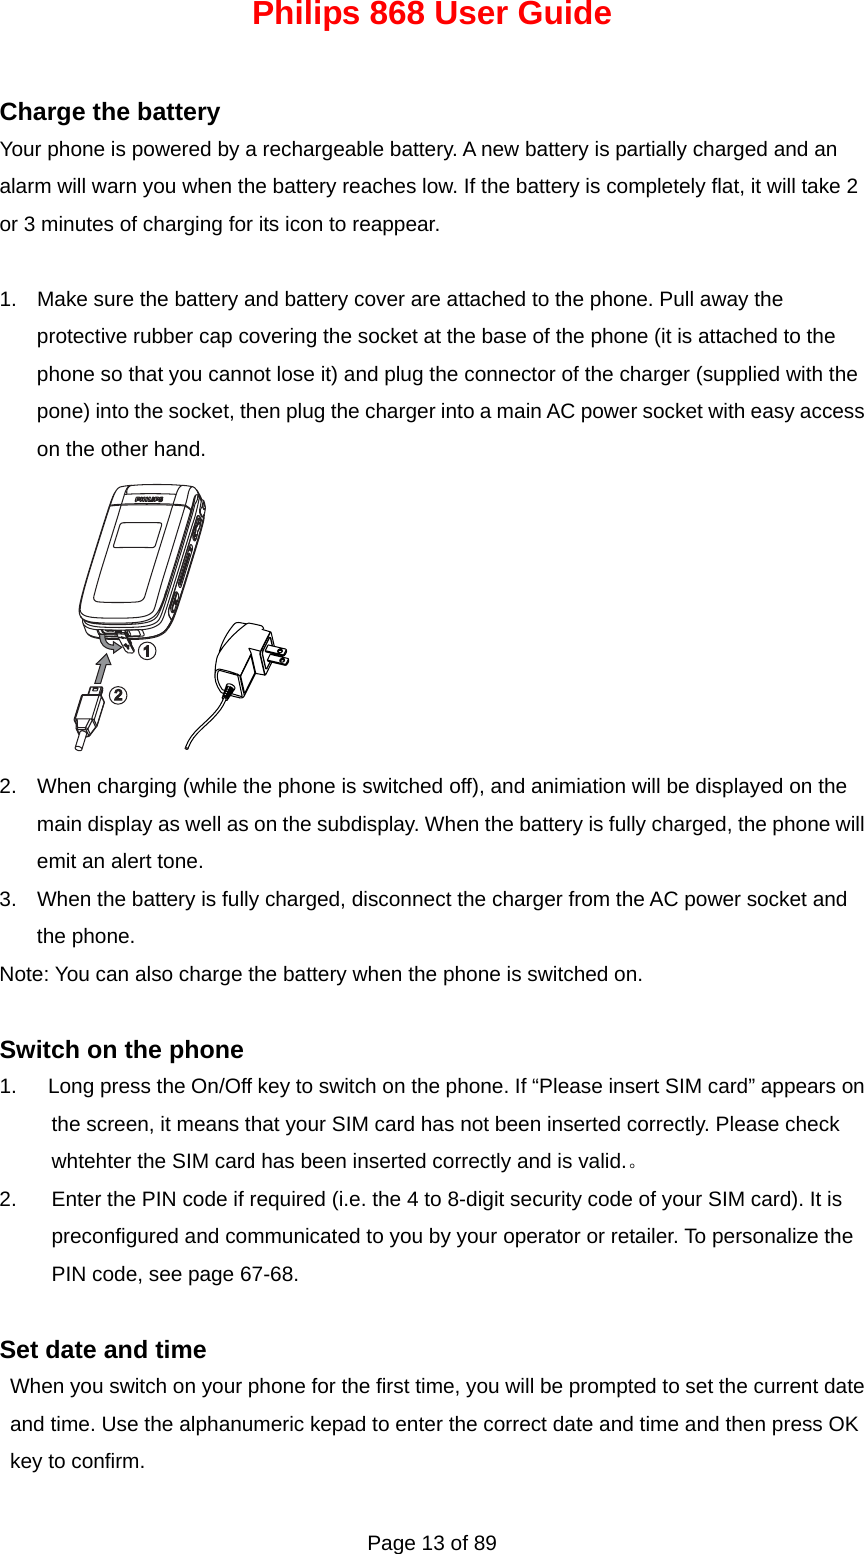 Philips 868 User Guide Page 13 of 89  Charge the battery Your phone is powered by a rechargeable battery. A new battery is partially charged and an alarm will warn you when the battery reaches low. If the battery is completely flat, it will take 2 or 3 minutes of charging for its icon to reappear.    1.  Make sure the battery and battery cover are attached to the phone. Pull away the protective rubber cap covering the socket at the base of the phone (it is attached to the phone so that you cannot lose it) and plug the connector of the charger (supplied with the pone) into the socket, then plug the charger into a main AC power socket with easy access on the other hand. 21 2.  When charging (while the phone is switched off), and animiation will be displayed on the main display as well as on the subdisplay. When the battery is fully charged, the phone will emit an alert tone.   3.  When the battery is fully charged, disconnect the charger from the AC power socket and the phone. Note: You can also charge the battery when the phone is switched on.  Switch on the phone 1.      Long press the On/Off key to switch on the phone. If “Please insert SIM card” appears on the screen, it means that your SIM card has not been inserted correctly. Please check whtehter the SIM card has been inserted correctly and is valid.。 2.  Enter the PIN code if required (i.e. the 4 to 8-digit security code of your SIM card). It is preconfigured and communicated to you by your operator or retailer. To personalize the PIN code, see page 67-68.  Set date and time When you switch on your phone for the first time, you will be prompted to set the current date and time. Use the alphanumeric kepad to enter the correct date and time and then press OK key to confirm. 